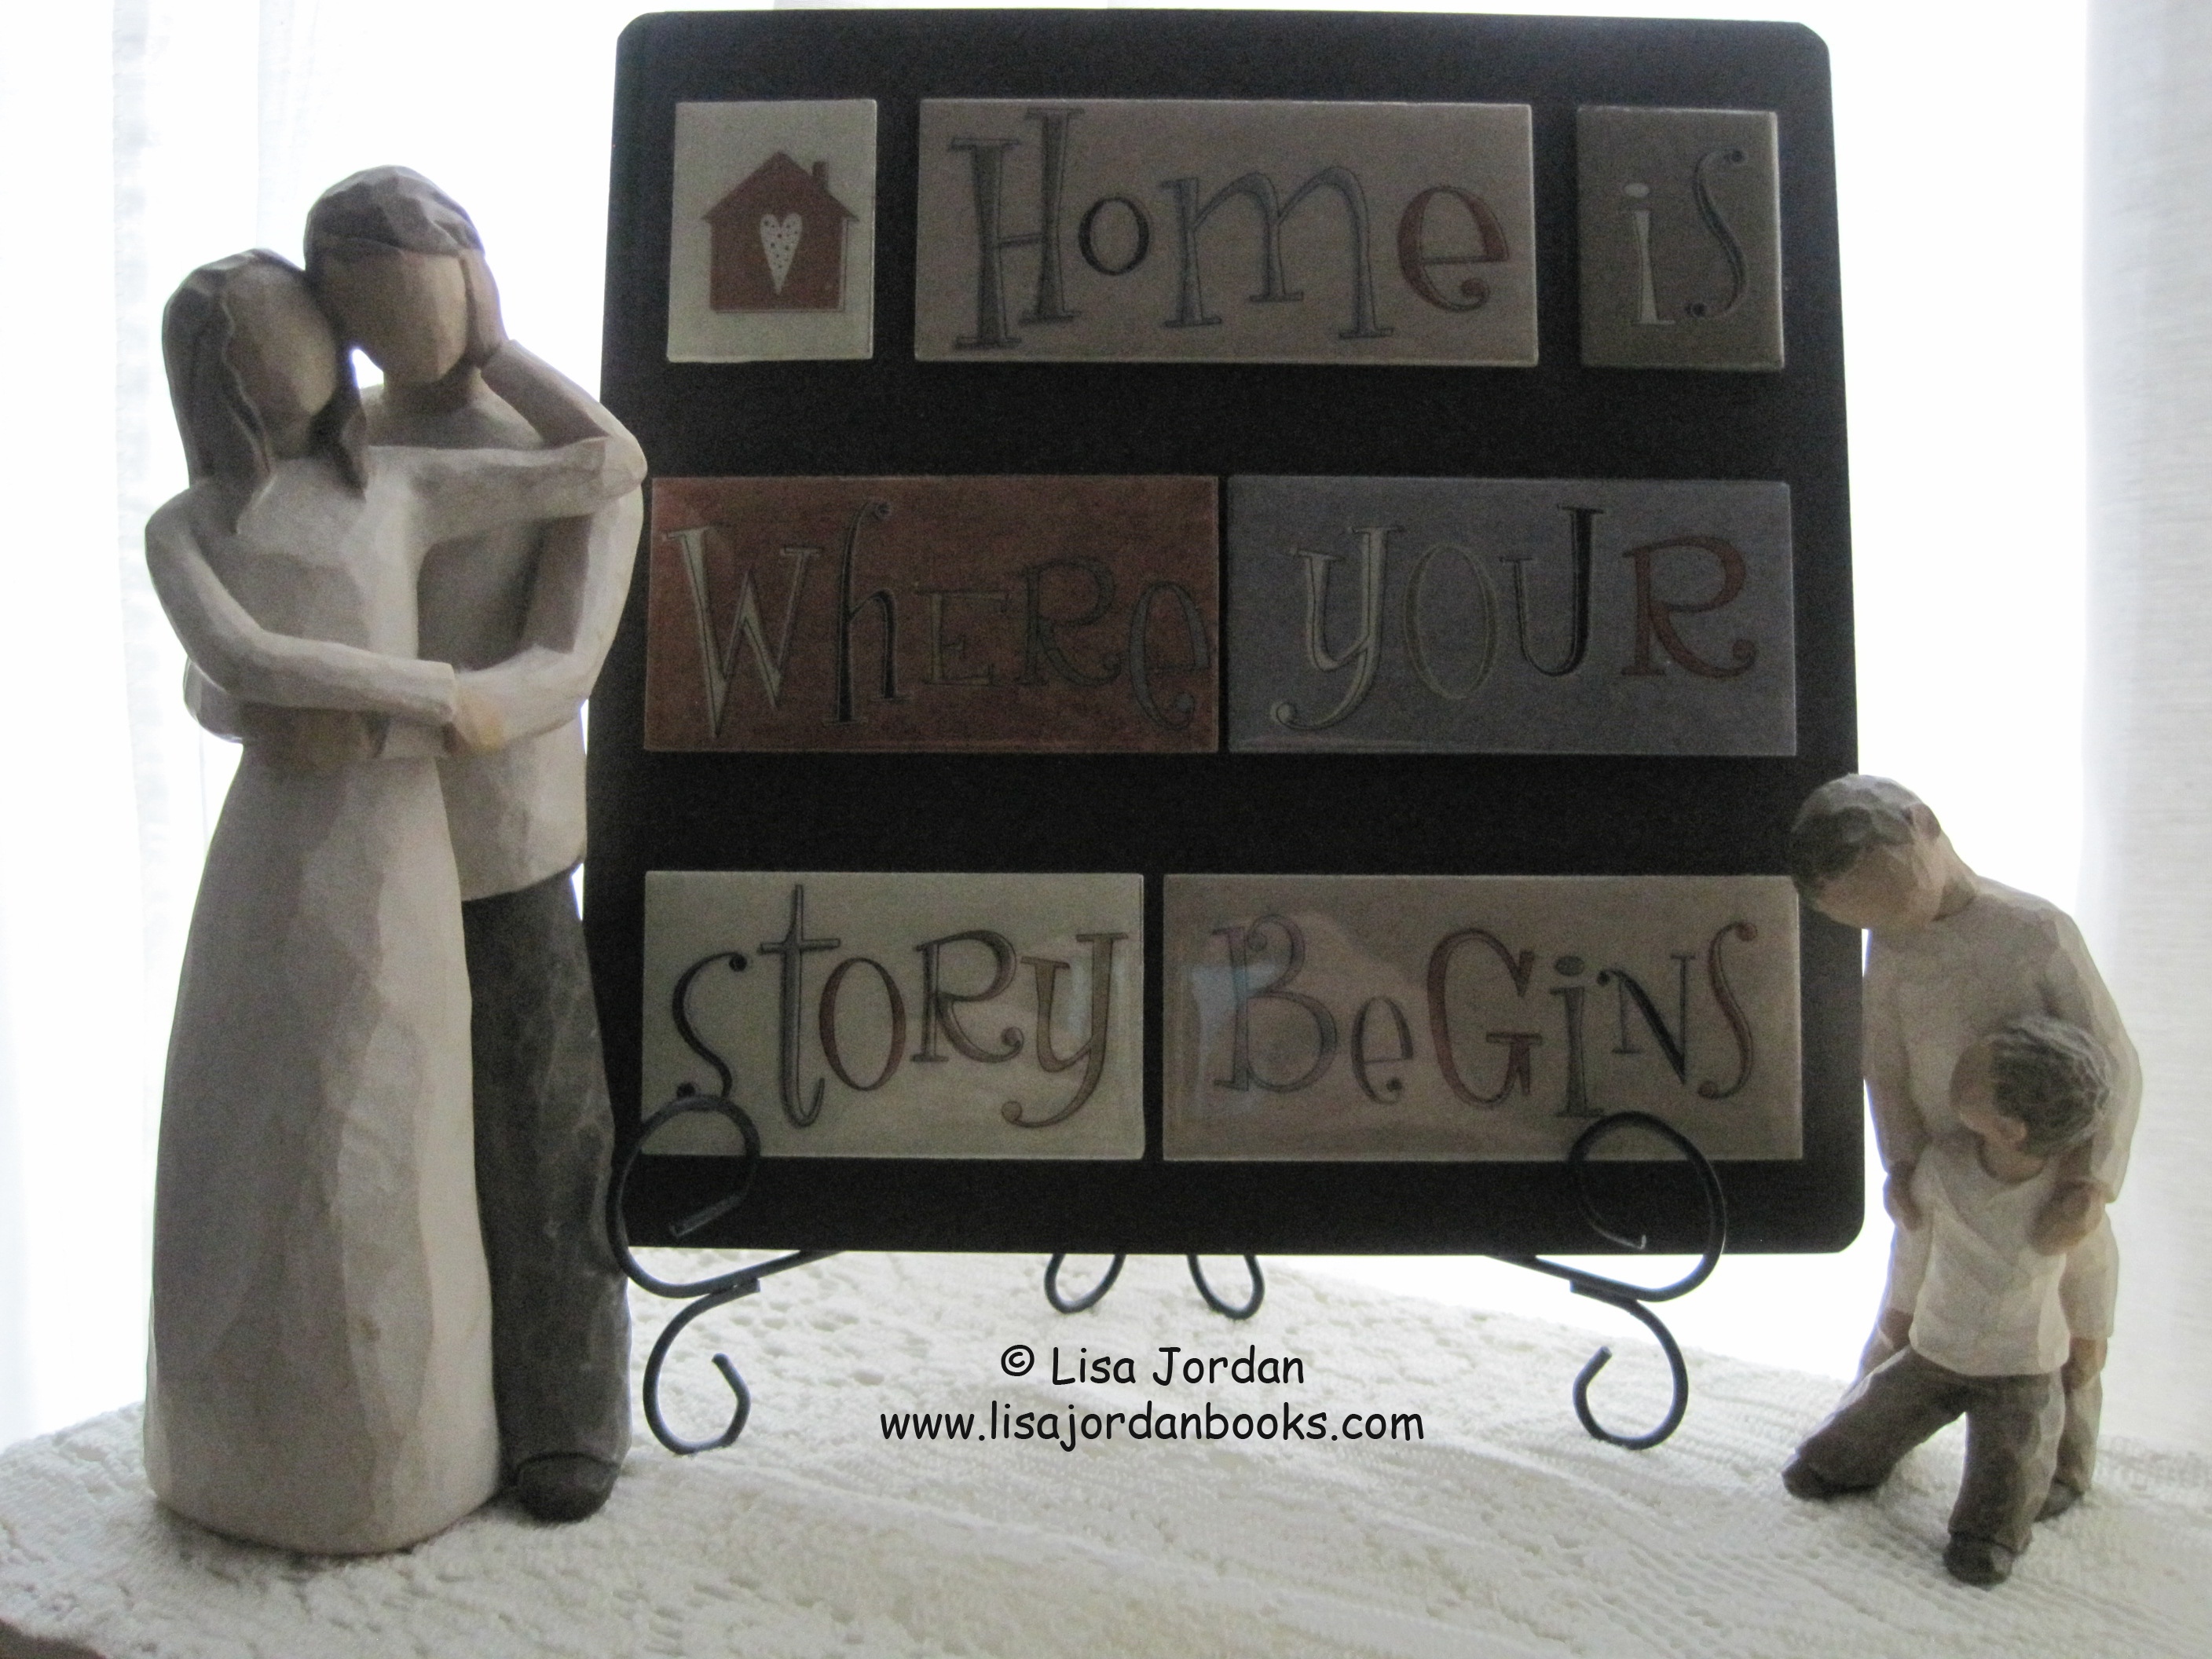 Home is Where Your Story Begins